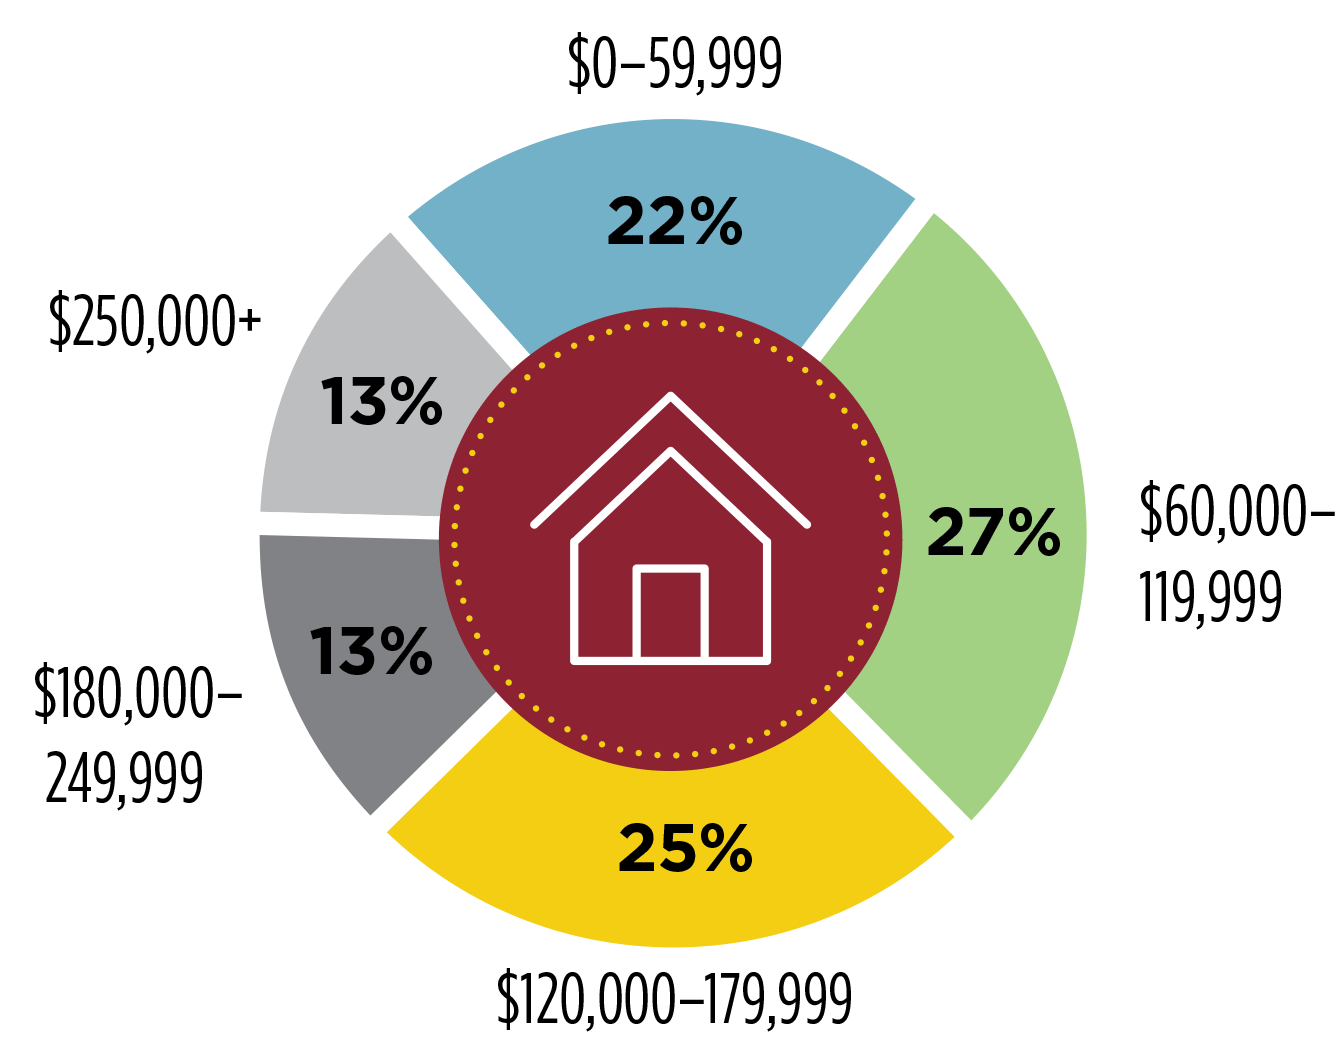 Pie chart showing the amount of household debt accumulated by percentages of the graduating student body